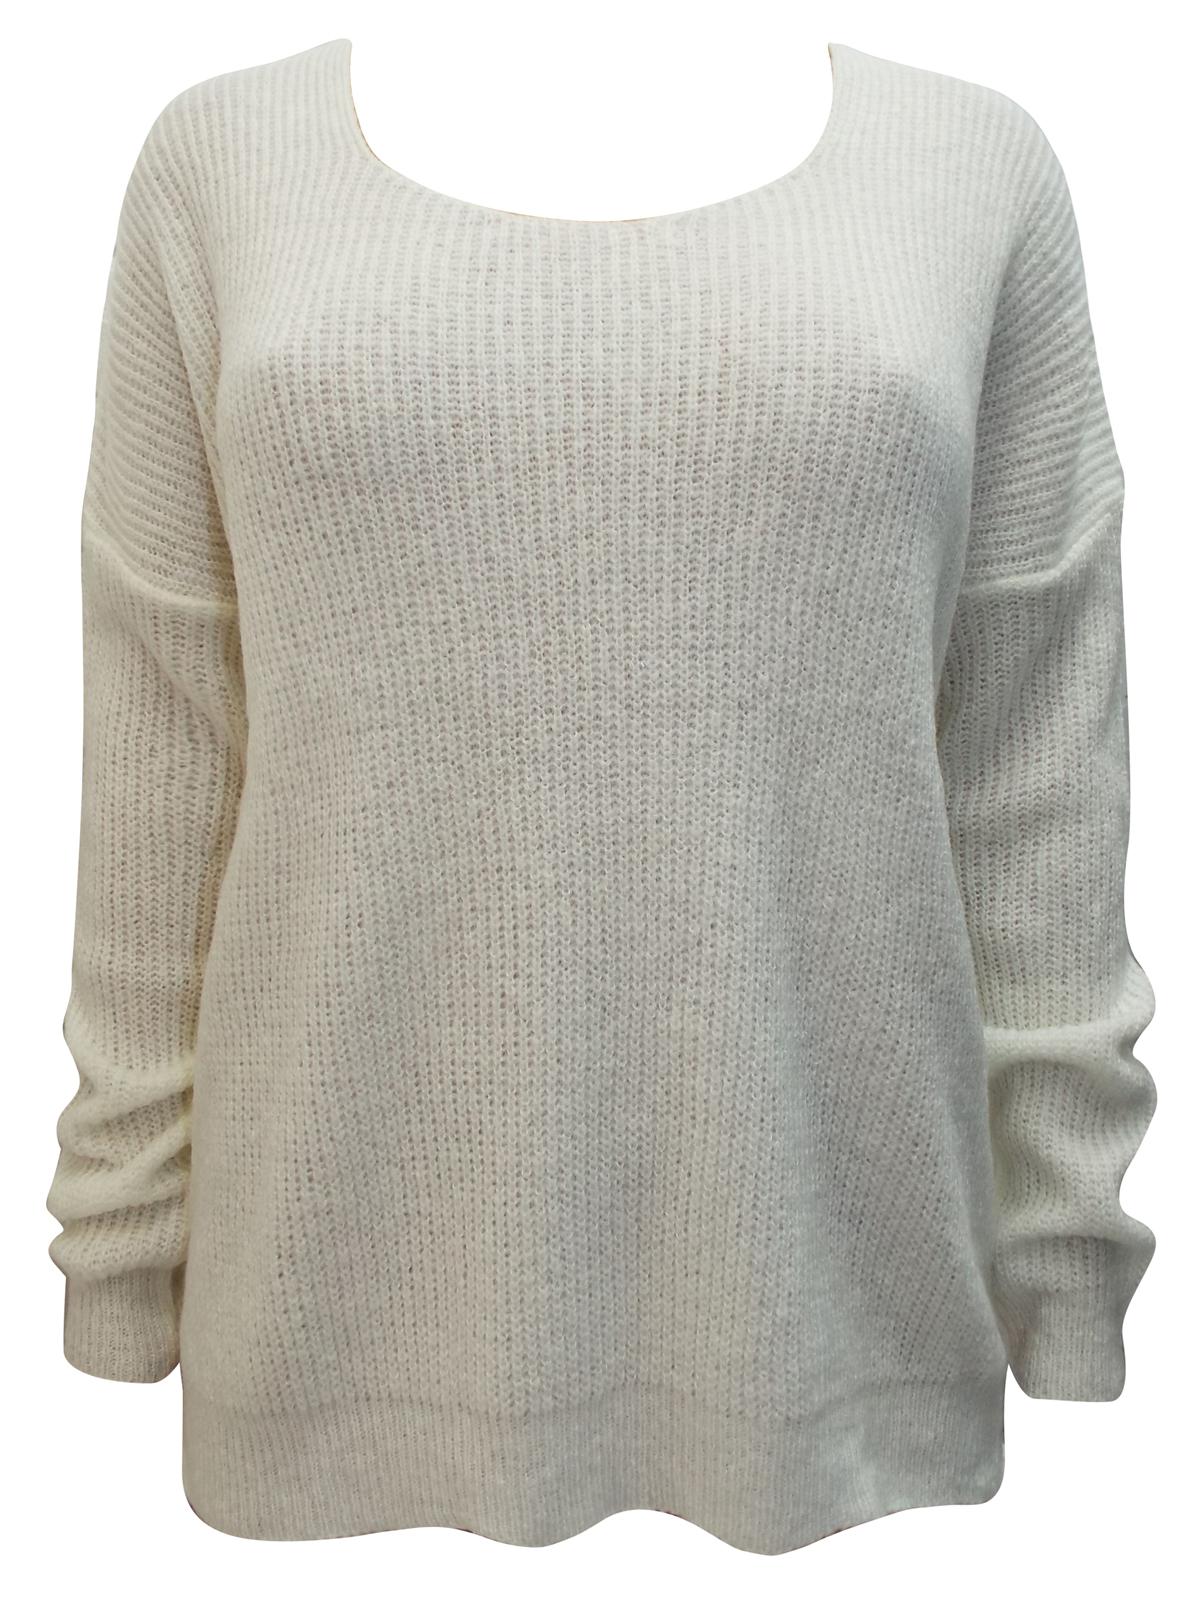 PLUS - - Plus CREAM Super Soft Knitted Boxy Long Sleeve Jumper - Plus ...